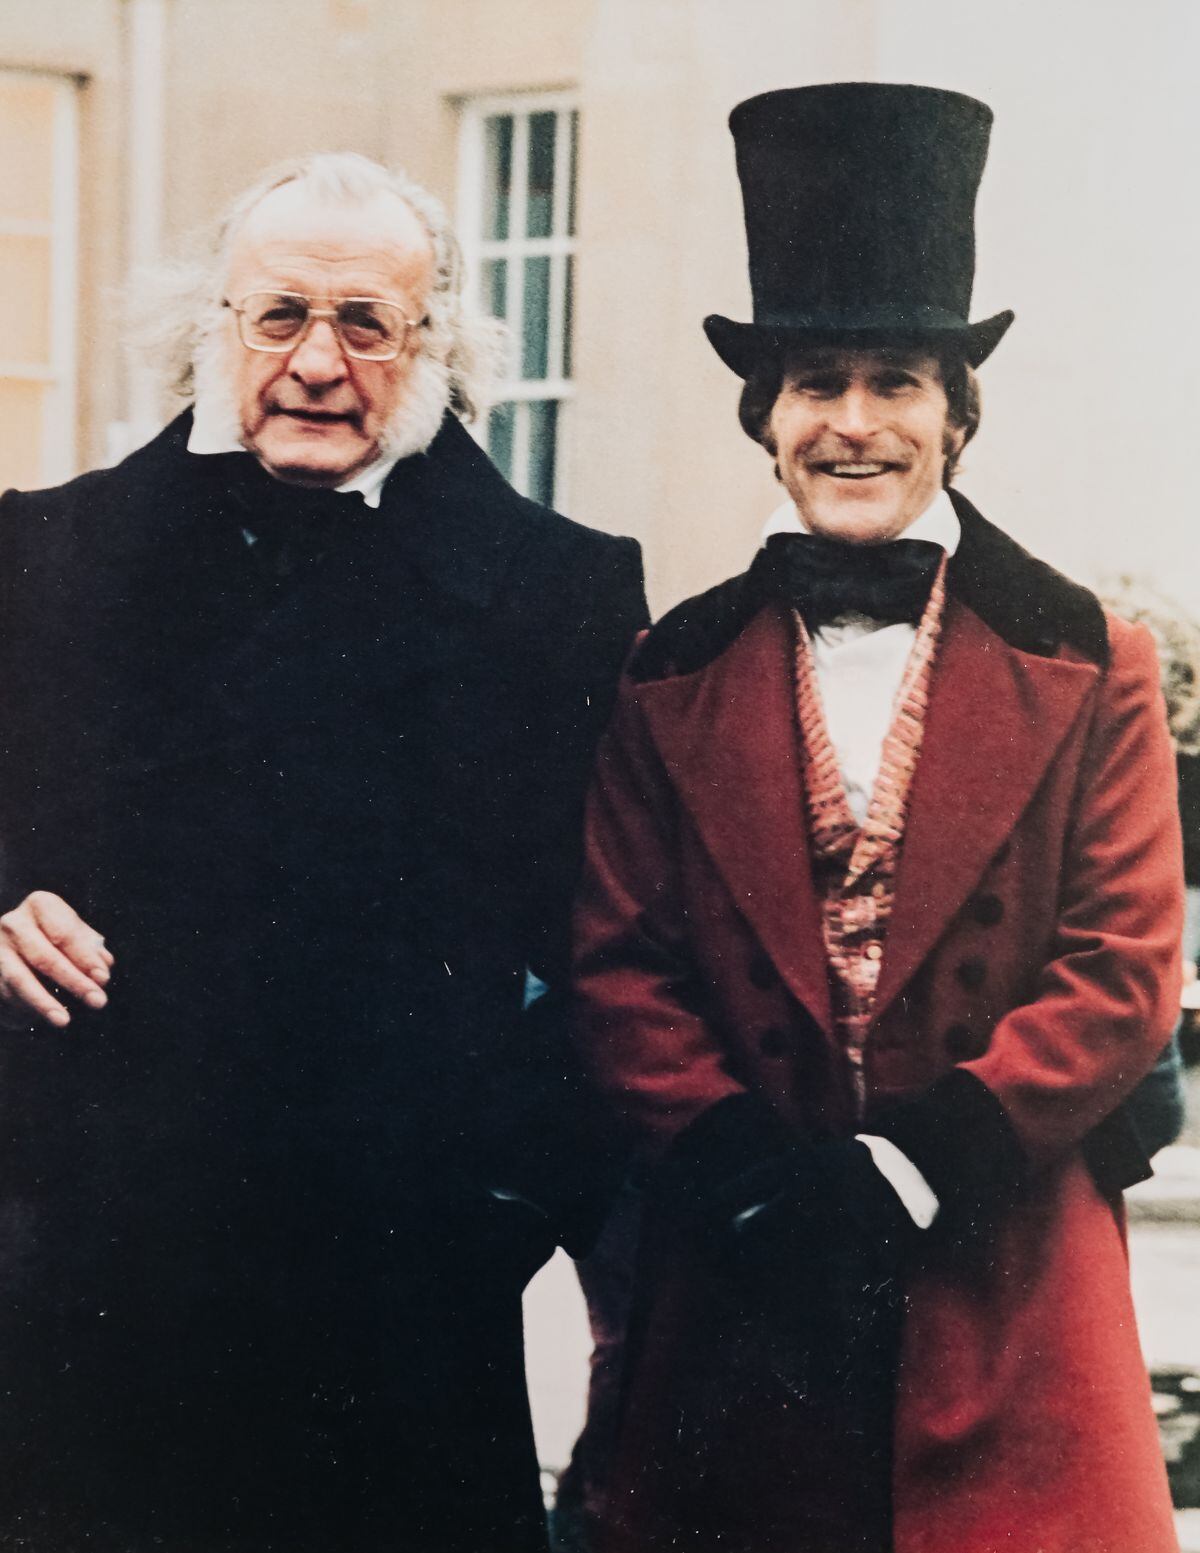 Kim Downer who was in the 1984 A Christmas Carol. Copy picture of Kim Downer pictured with George C. Scott outside of the old Royal Salop Infirmary.